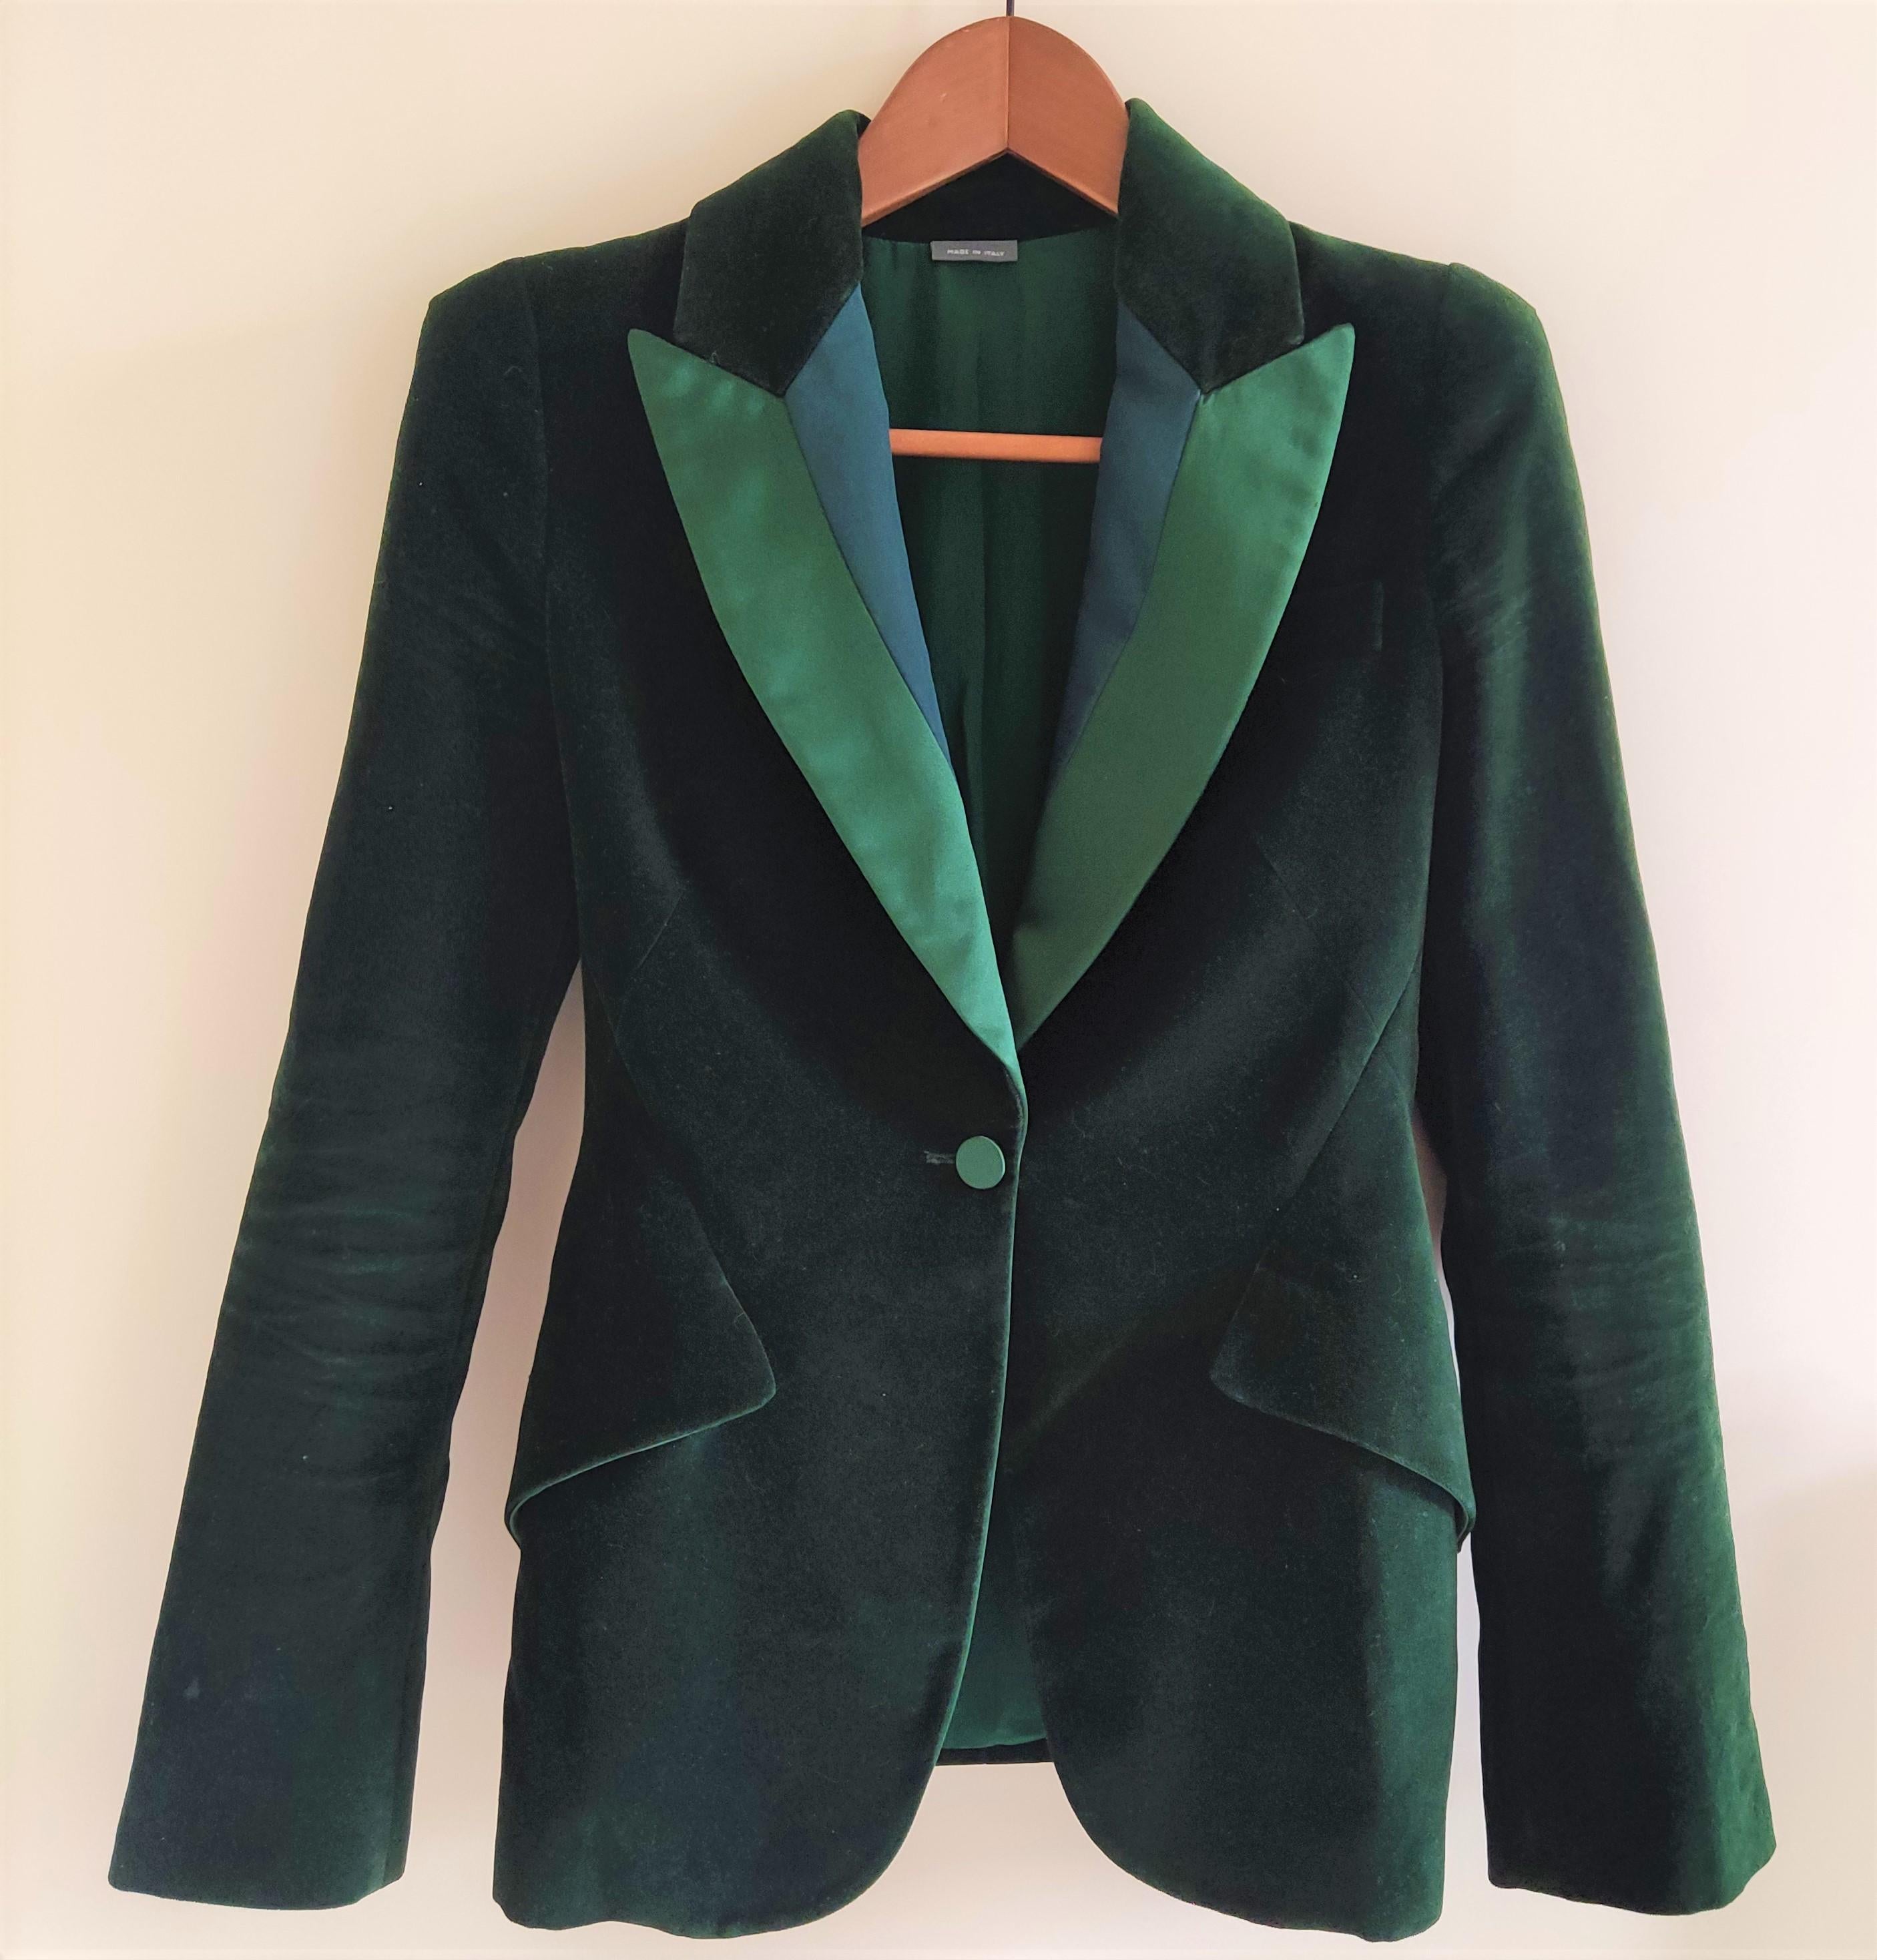 Alexander McQueen poison green blazer jacket.
Solid shuolder pads, great silhouette.
Vampire pockets.
Velvet touch.
Hidden inner pocket.

Very good condition.

SIZE
XS.
Marked size: 36. Model`s size in photos: XS.
Length: 64 cm / 25.2 inch
Armpit to